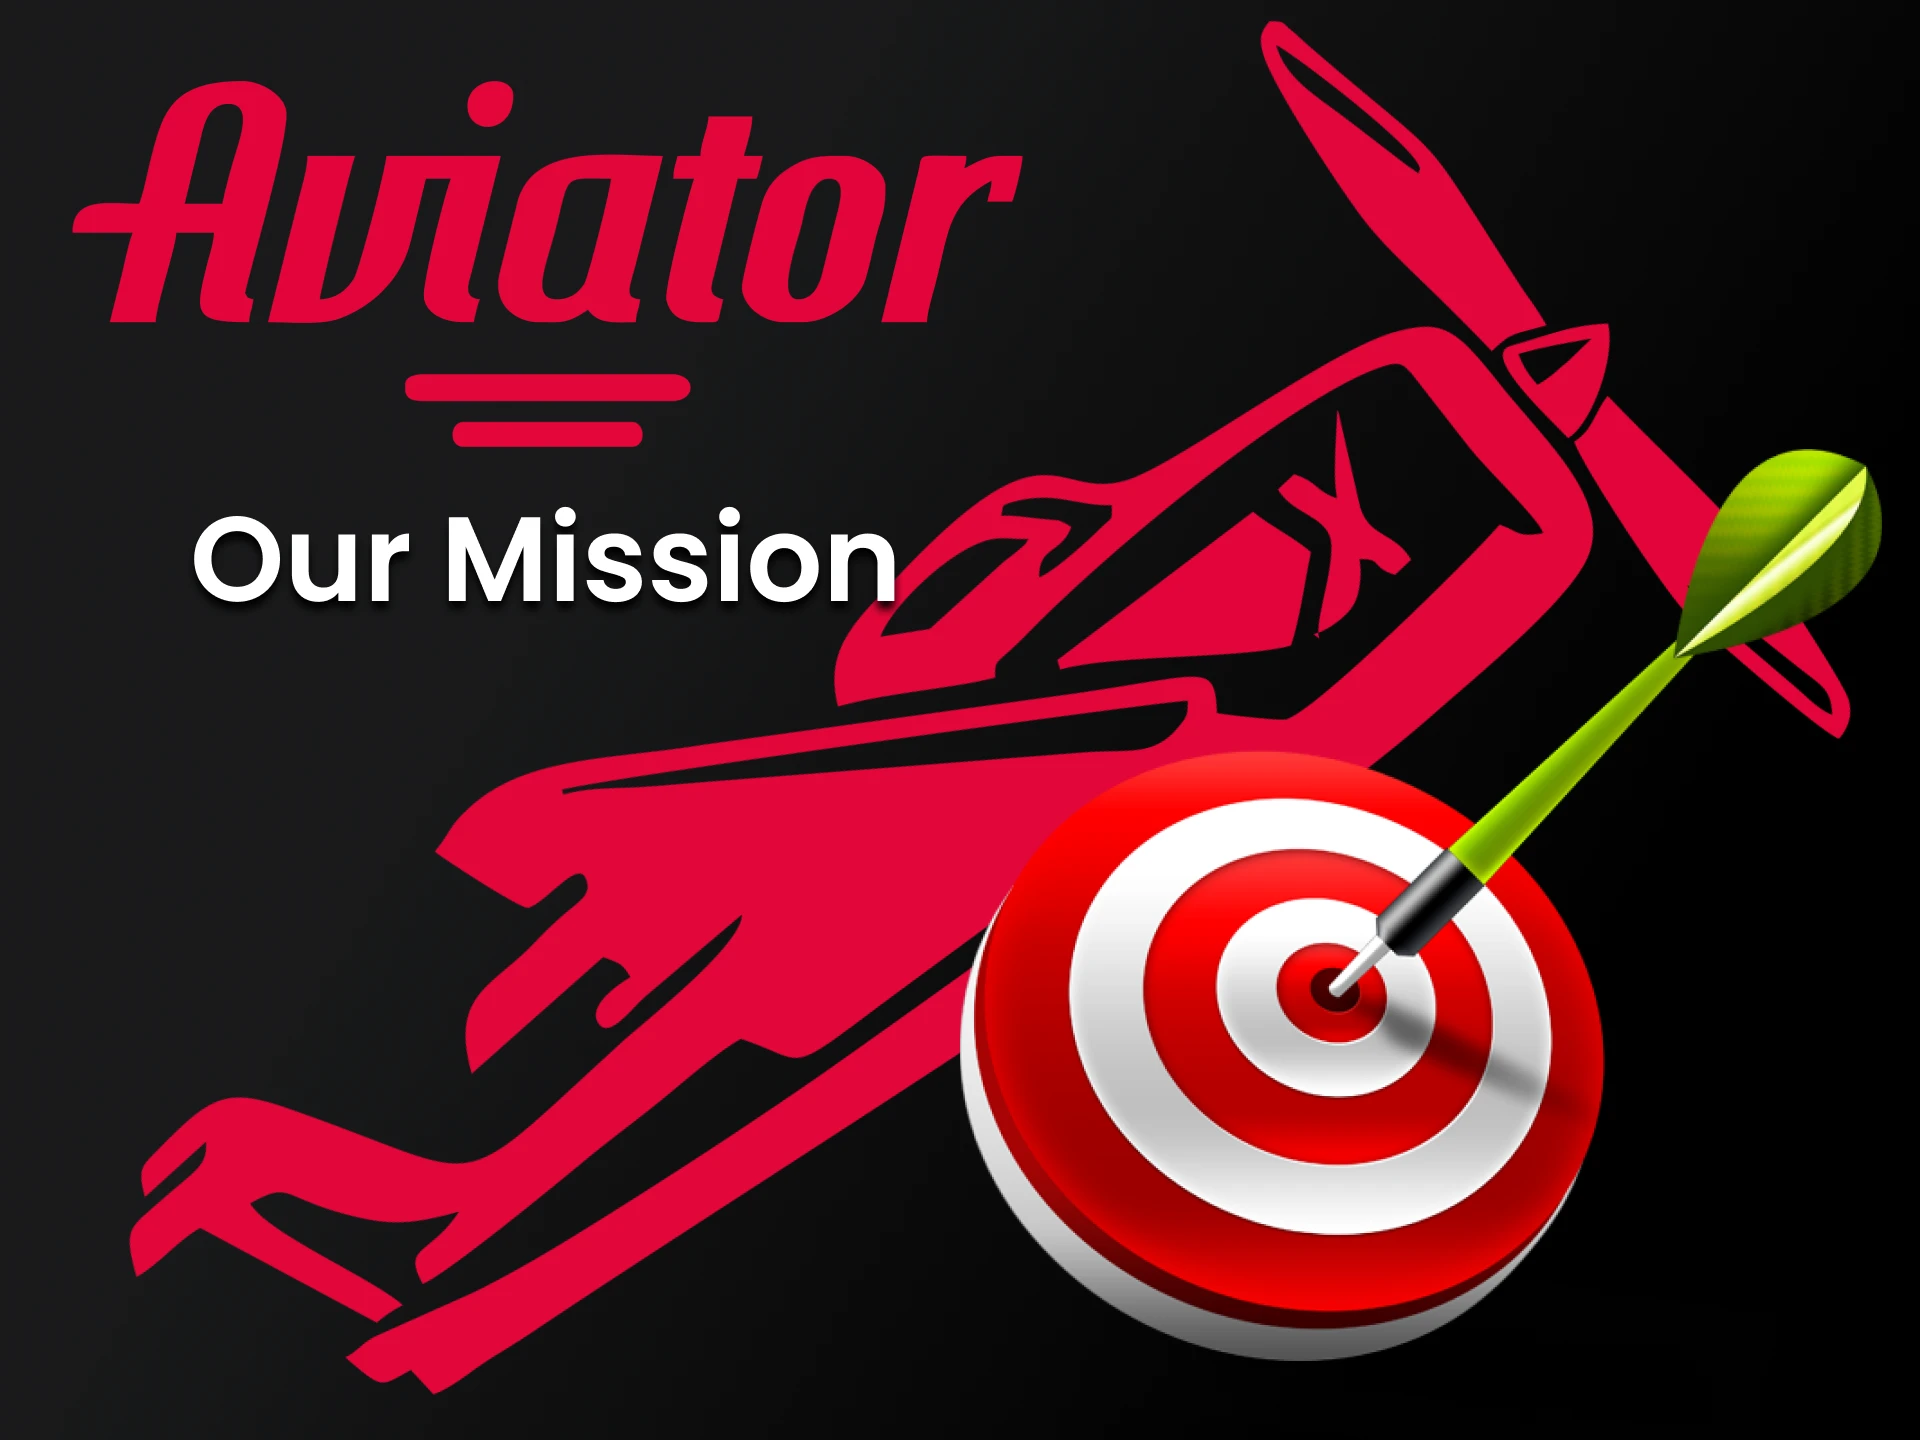 Find out about our goals for the game Aviator.